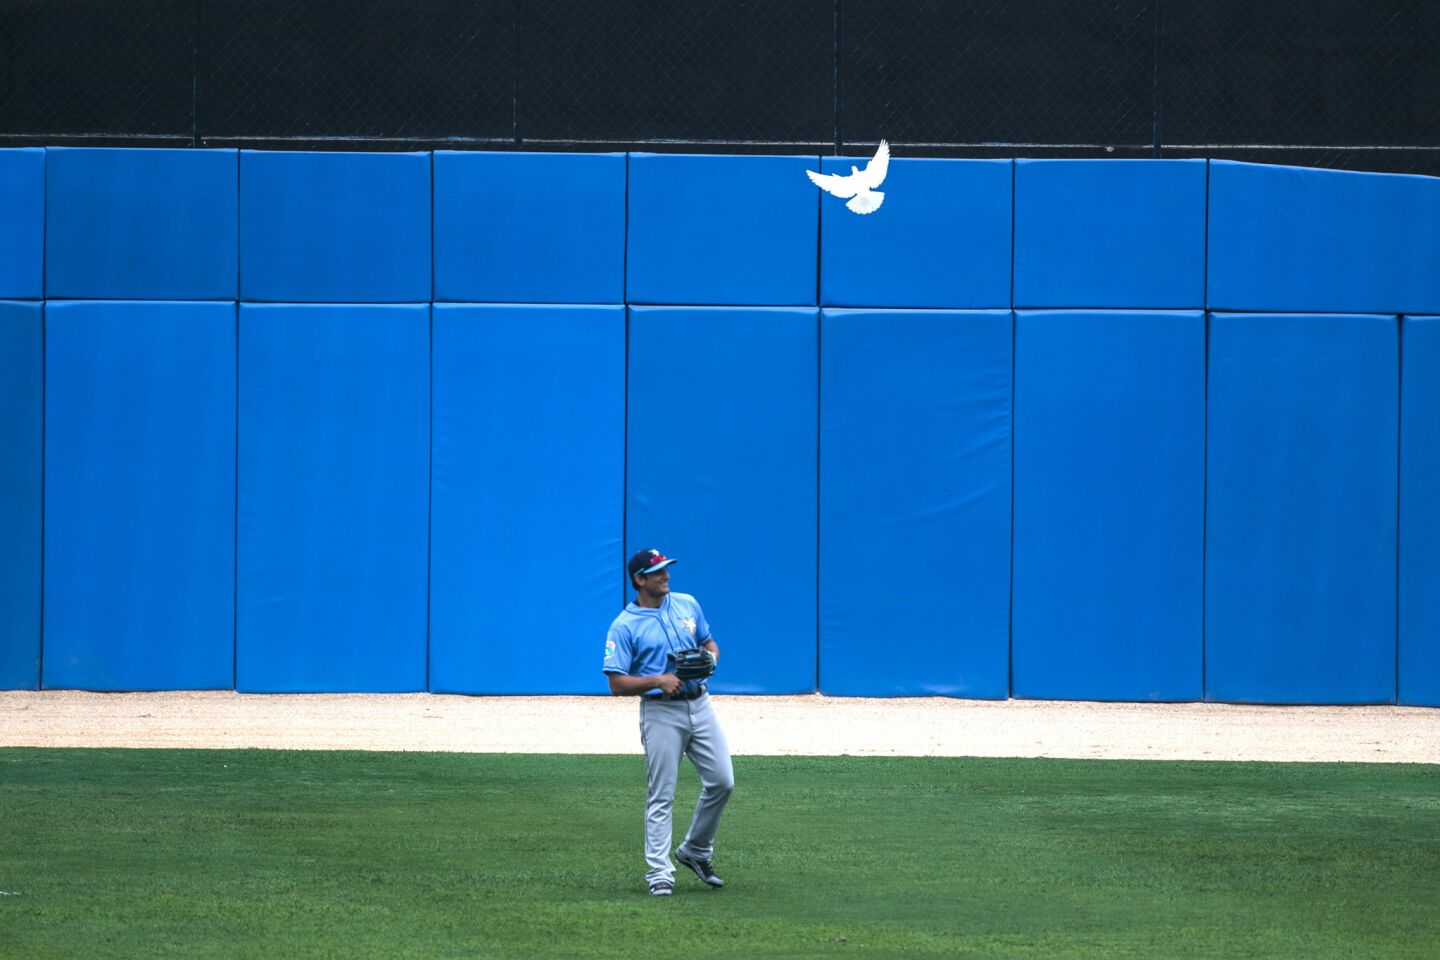 Rays center fielder Mikie Mahtook chuckles as a dove flies overhead during an exhibition game between Tampa and the Cuban National Team.